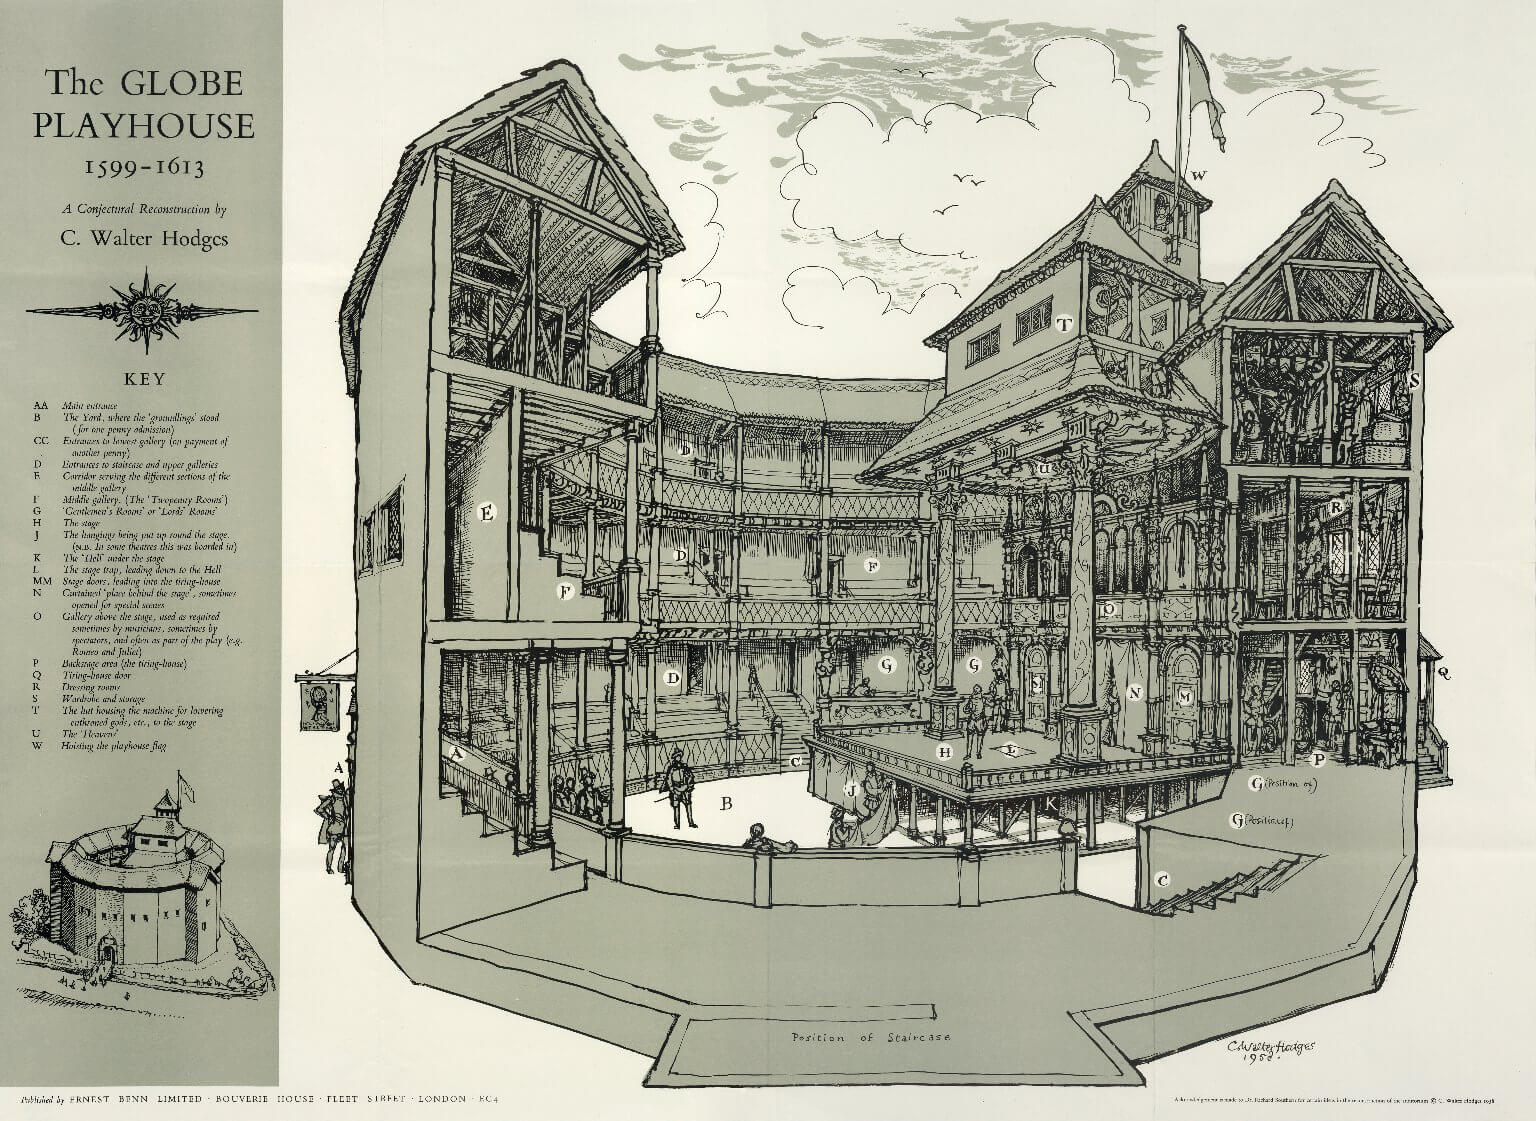 Conjectural reconstruction of the Globe theatre by C. Walter Hodges based on archeological and documentary evidence (image courtesy C. Walter Hodges)